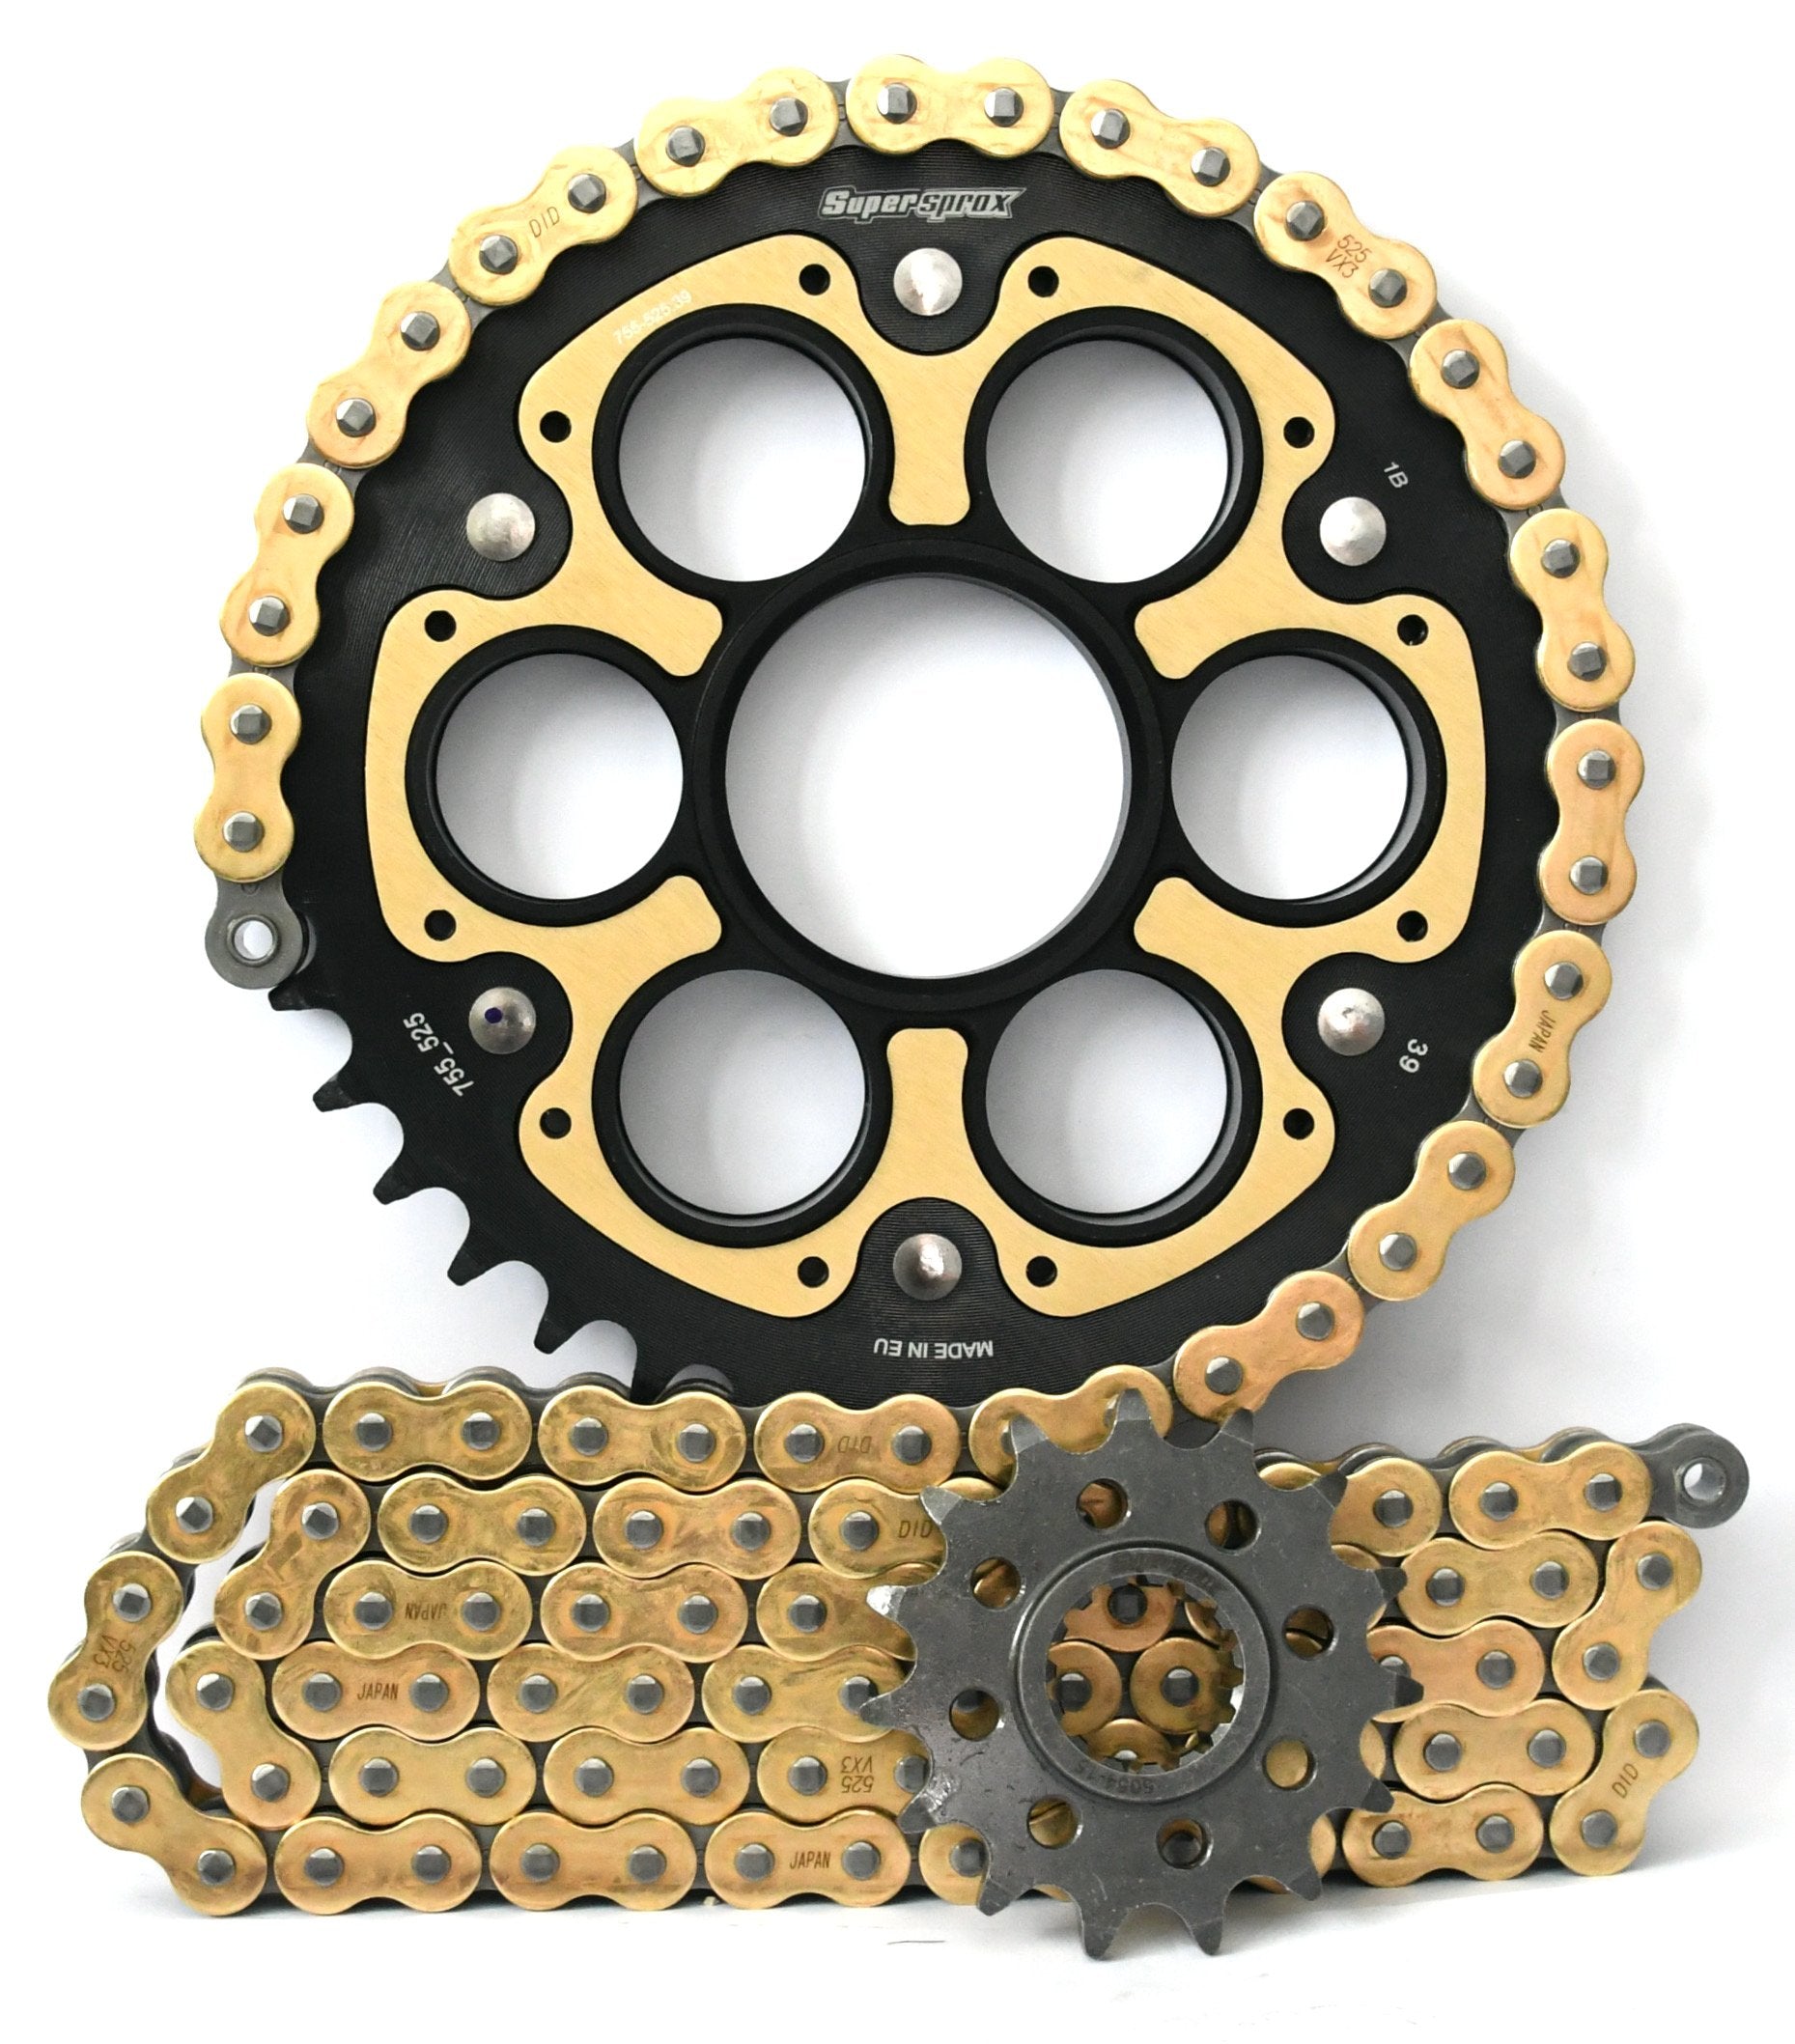 Supersprox Chain & Sprocket Kit for Ducati Diavel 1198 2011-2018 - Standard Gearing - 0